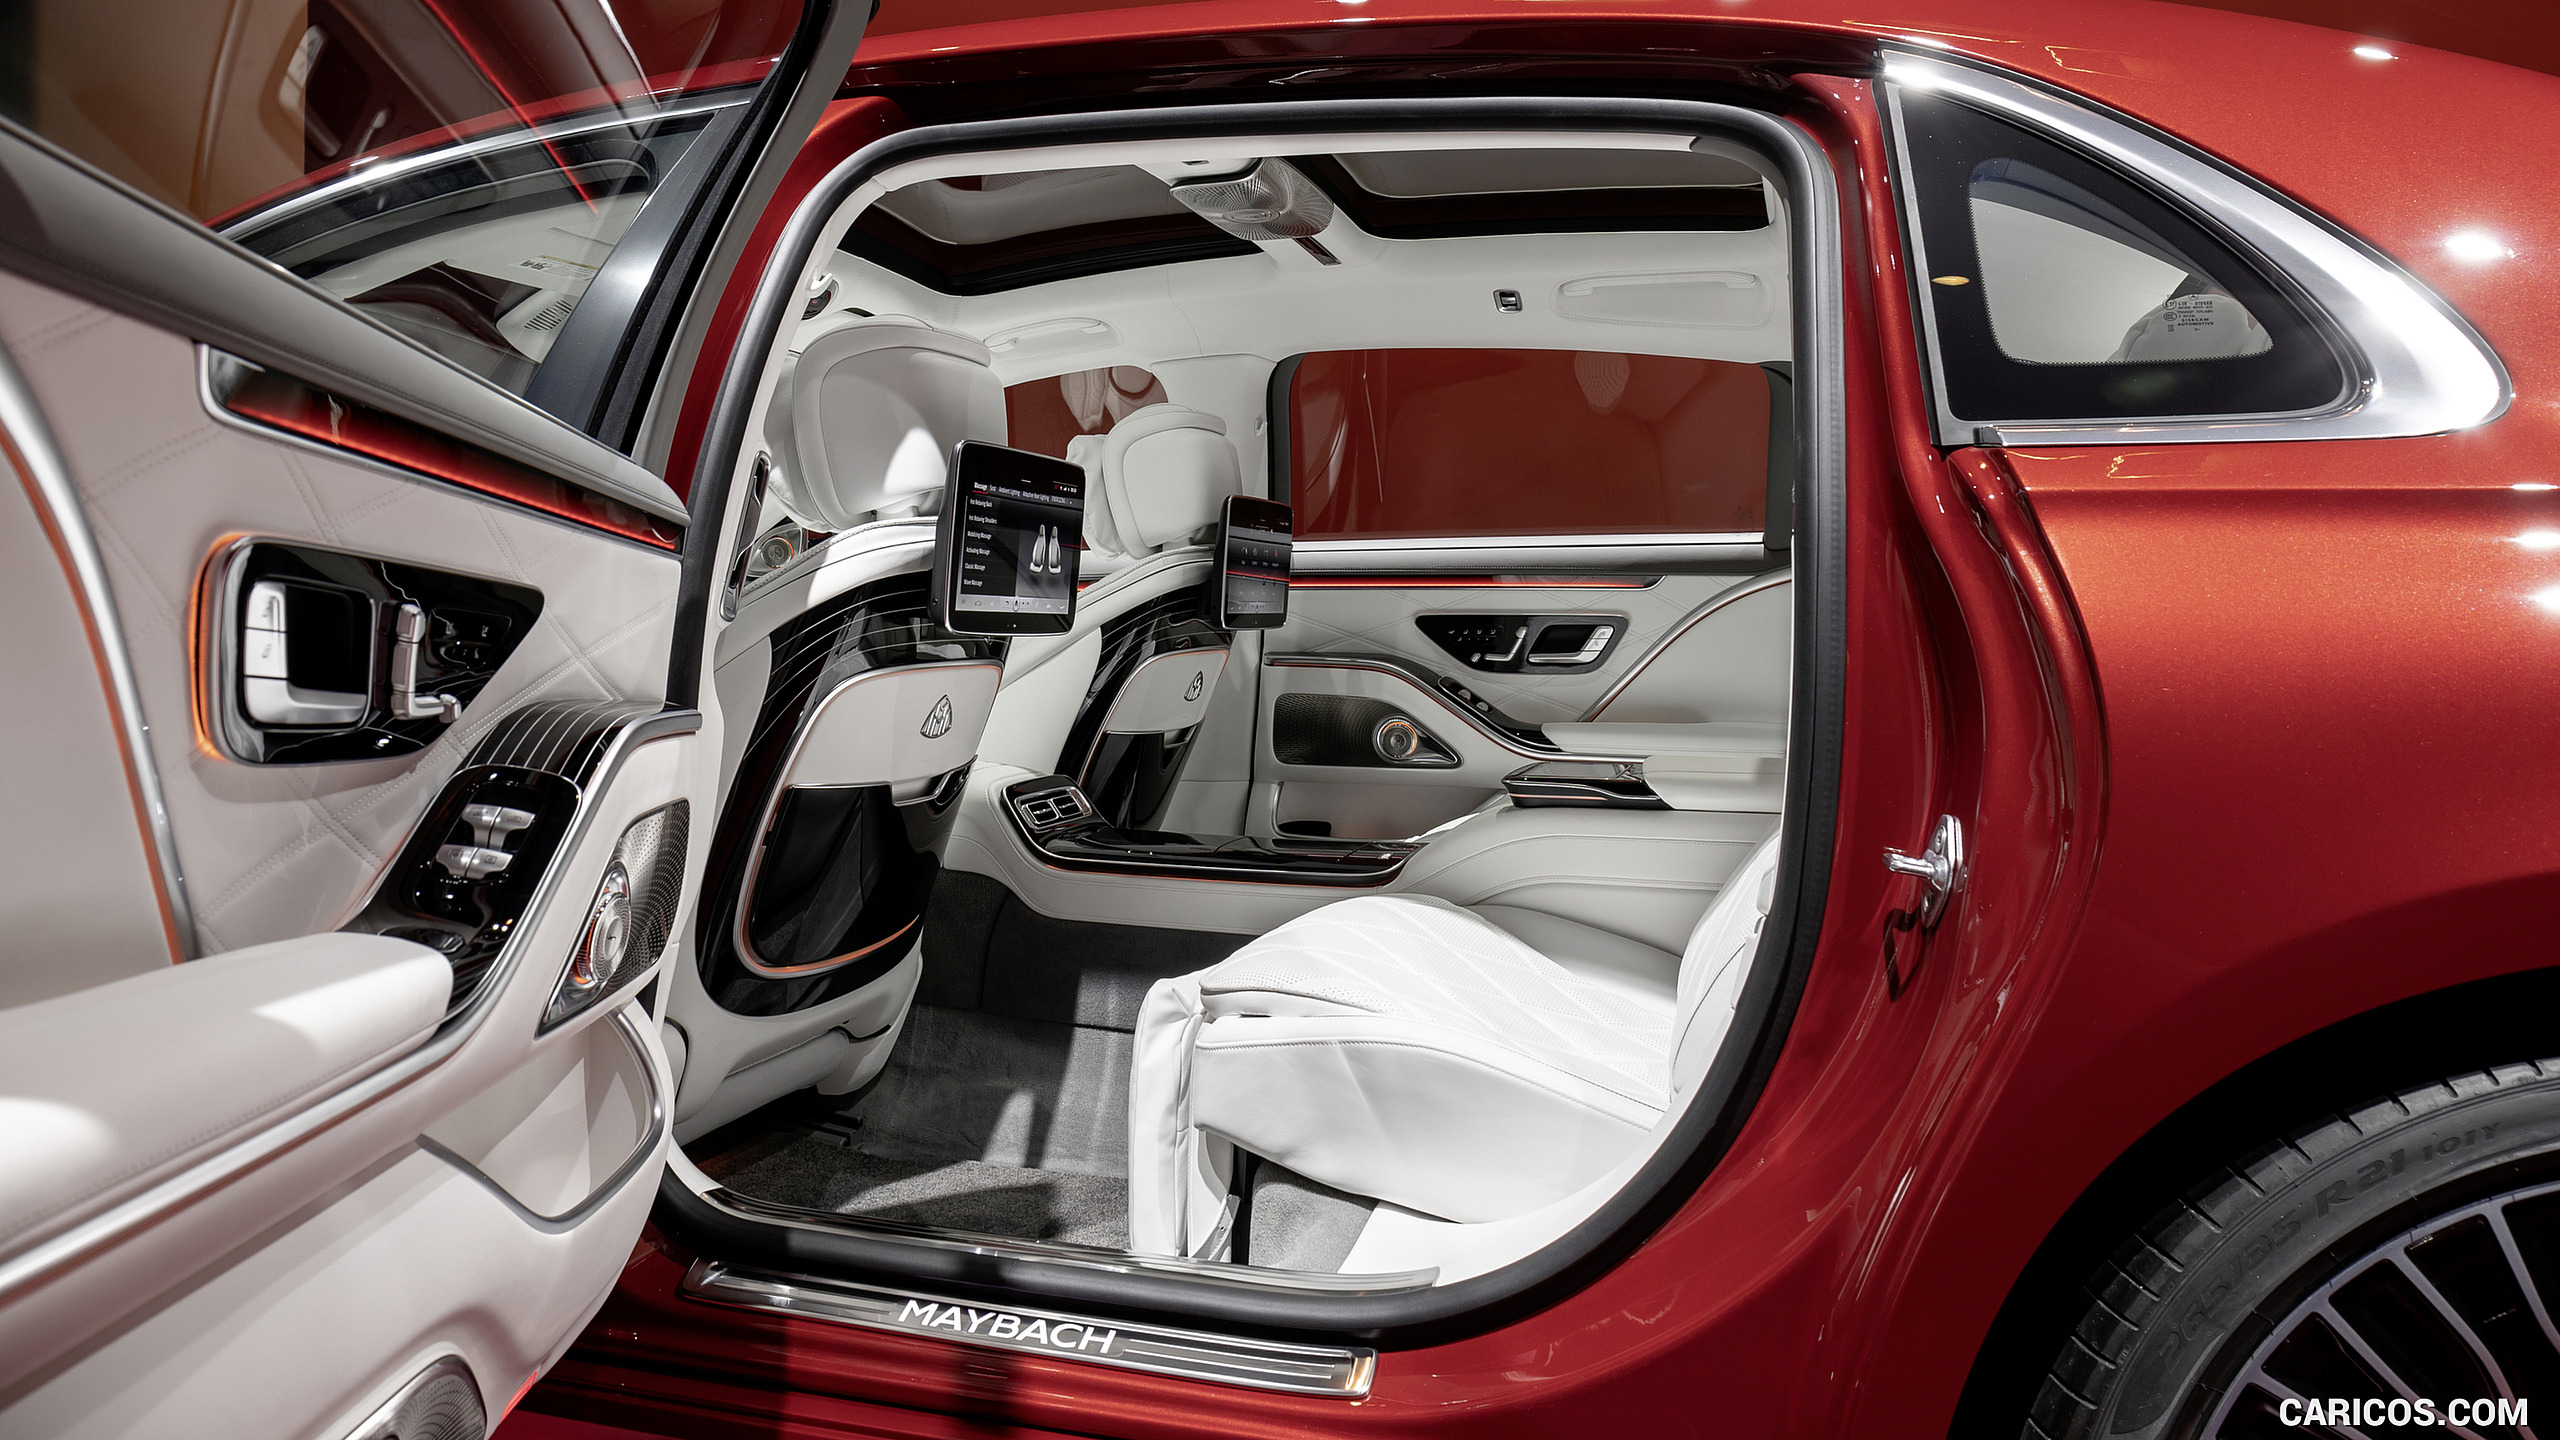 2021 Mercedes-Maybach S-Class - Interior, Rear Seats, #137 of 157